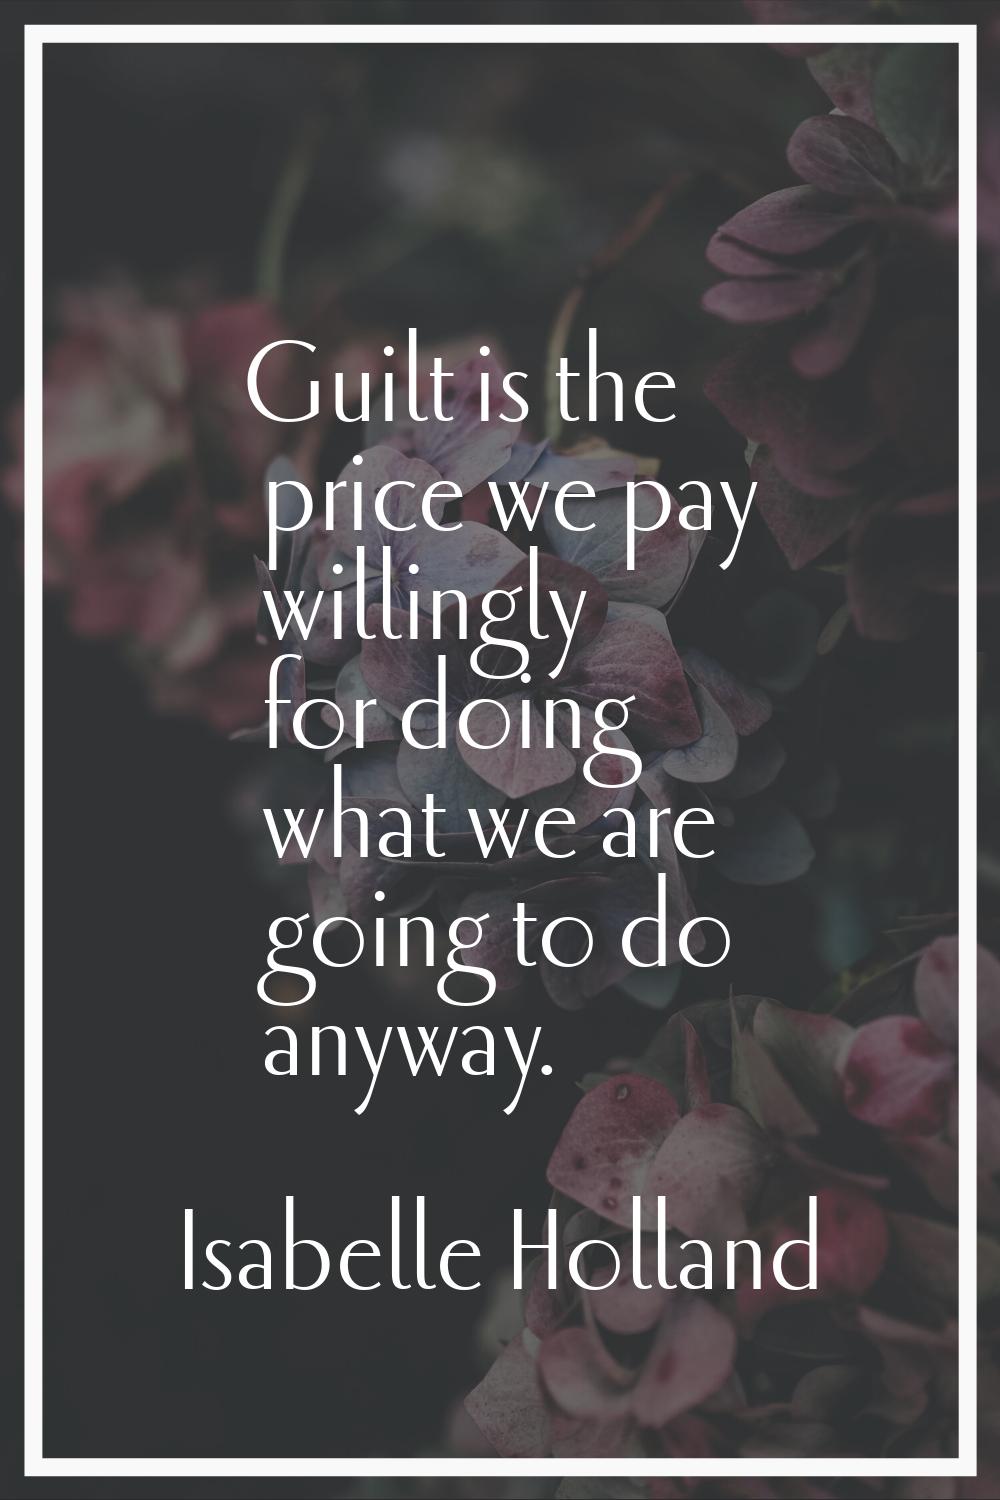 Guilt is the price we pay willingly for doing what we are going to do anyway.